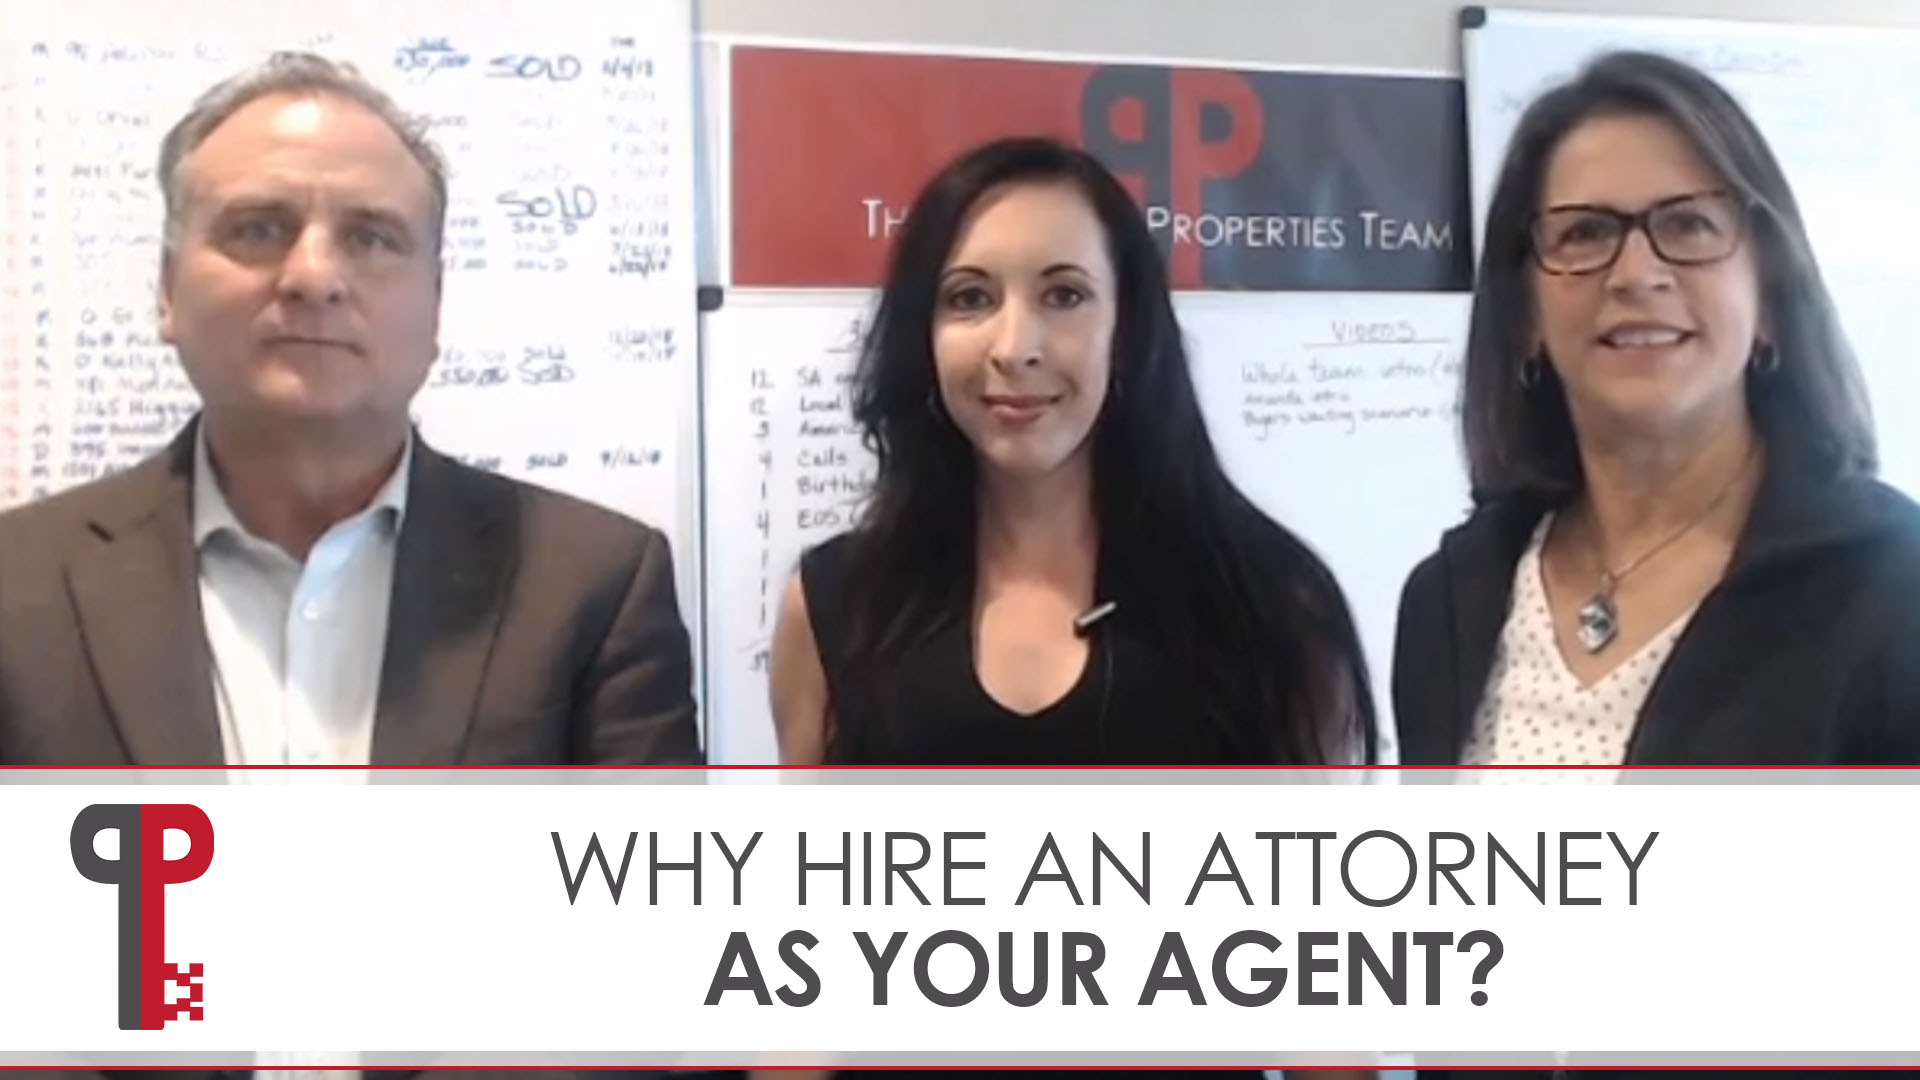 The Benefits of Hiring an Attorney to Buy or Sell Your Home